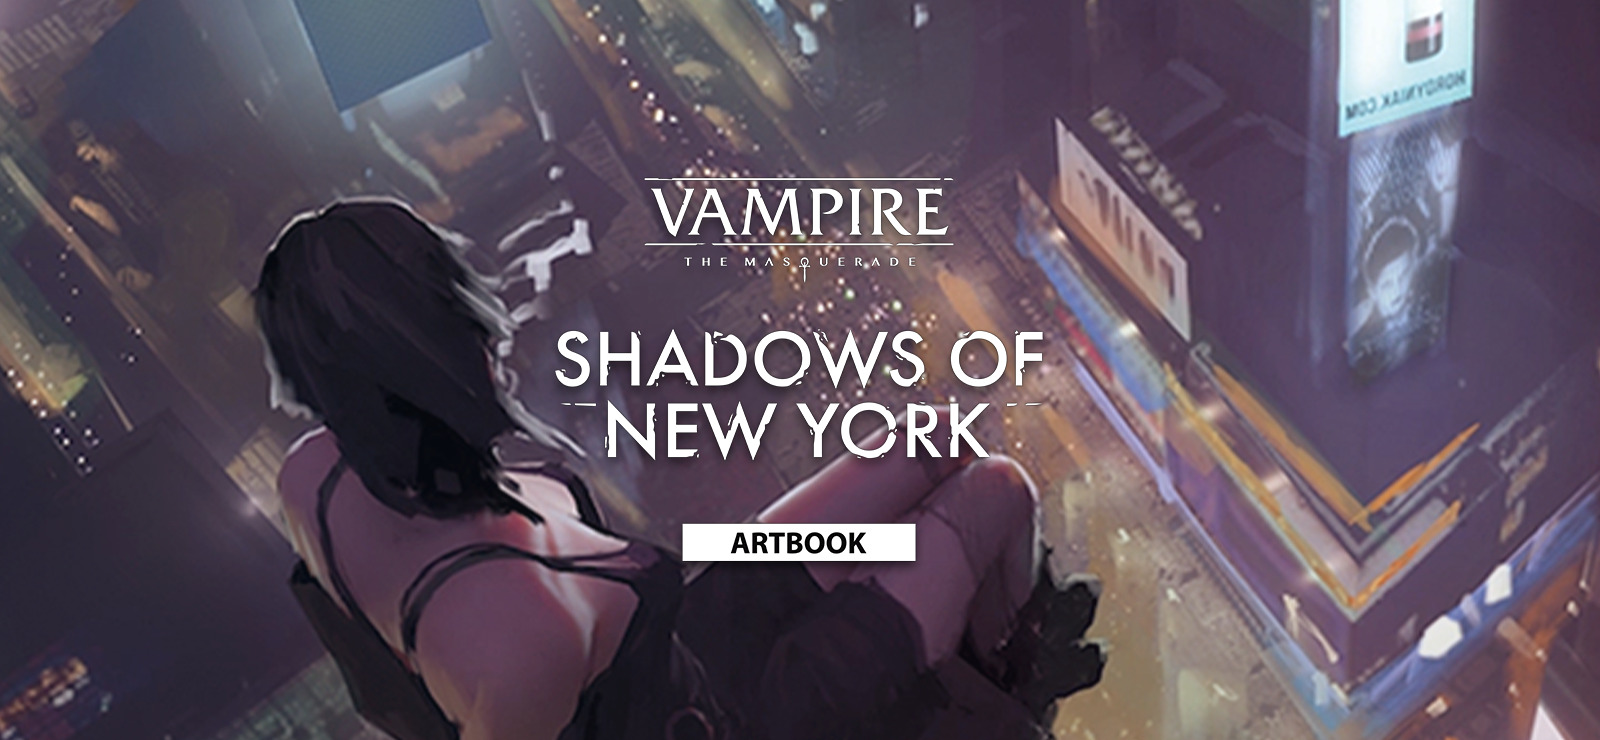 Vampire: the masquerade - shadows of new york download for mac